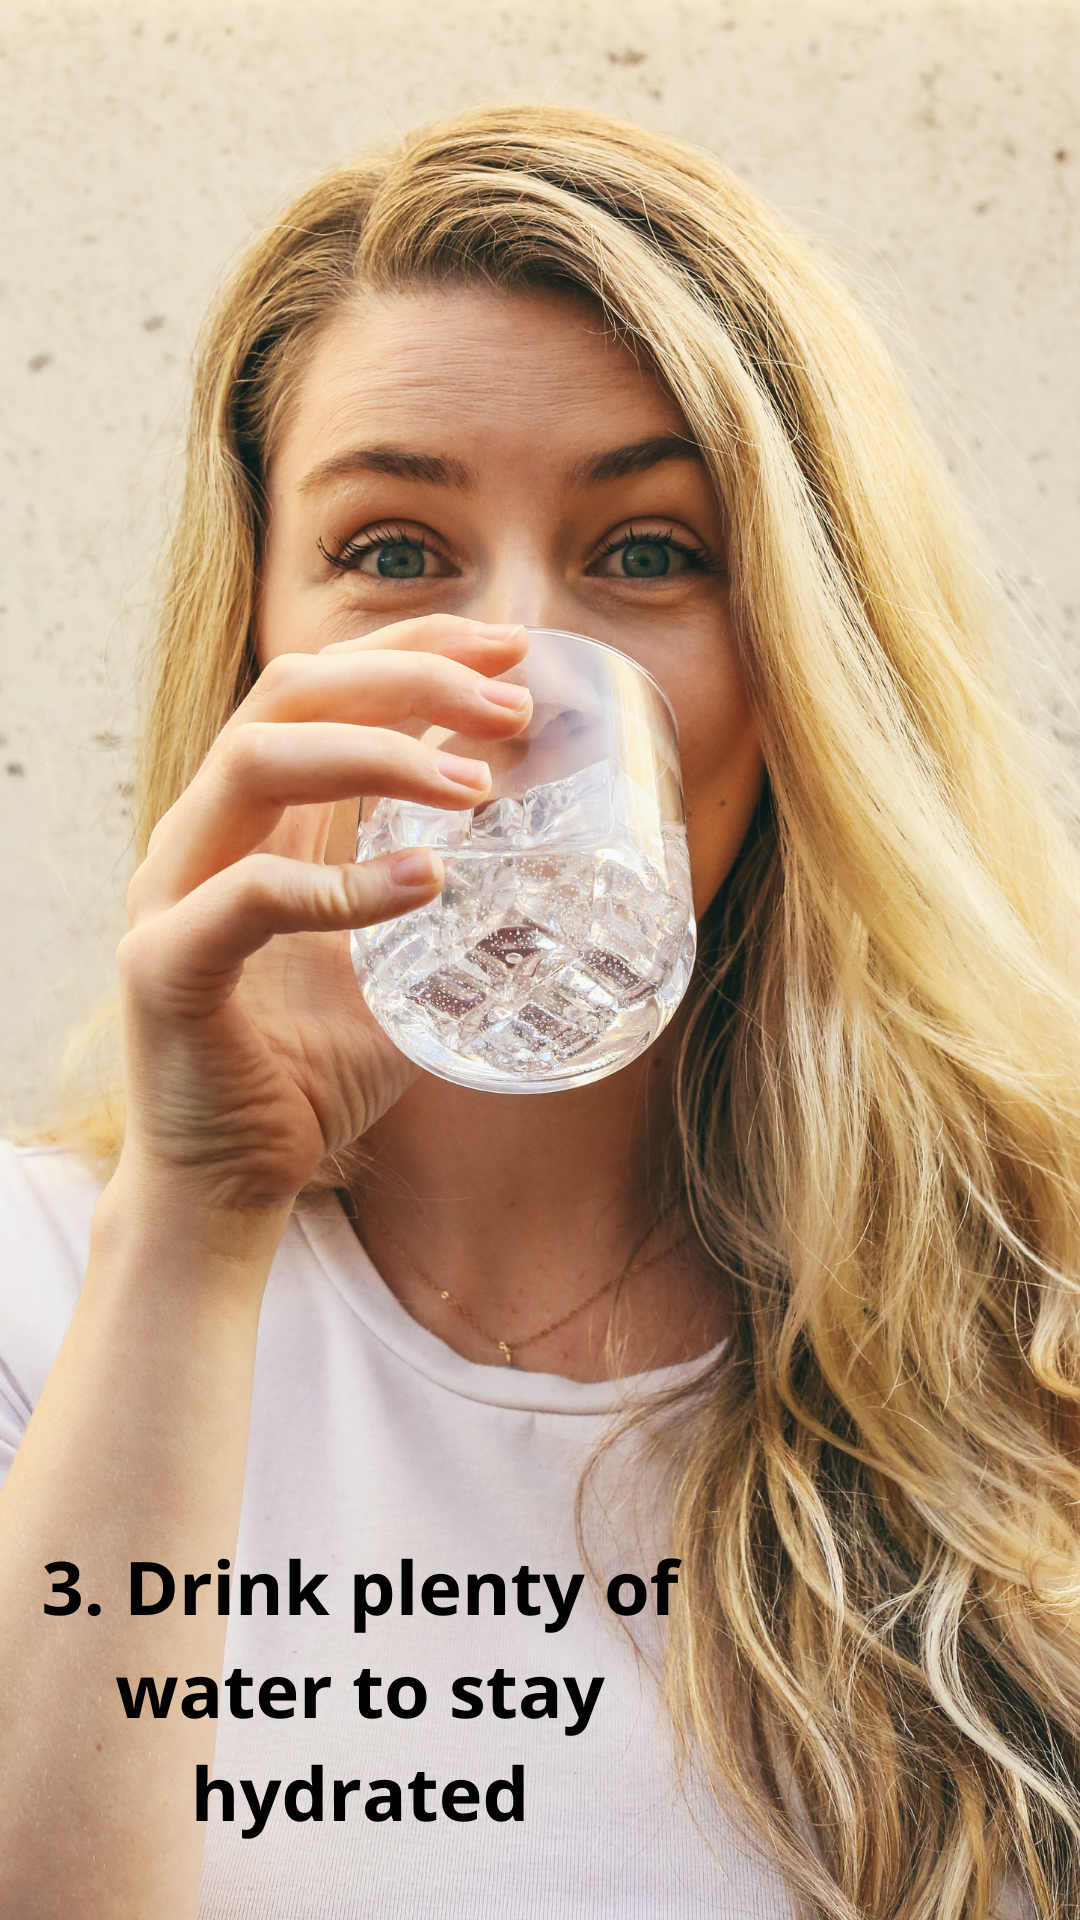 3. Drink plenty of water to stay hydrated (photo of woman drinking water)